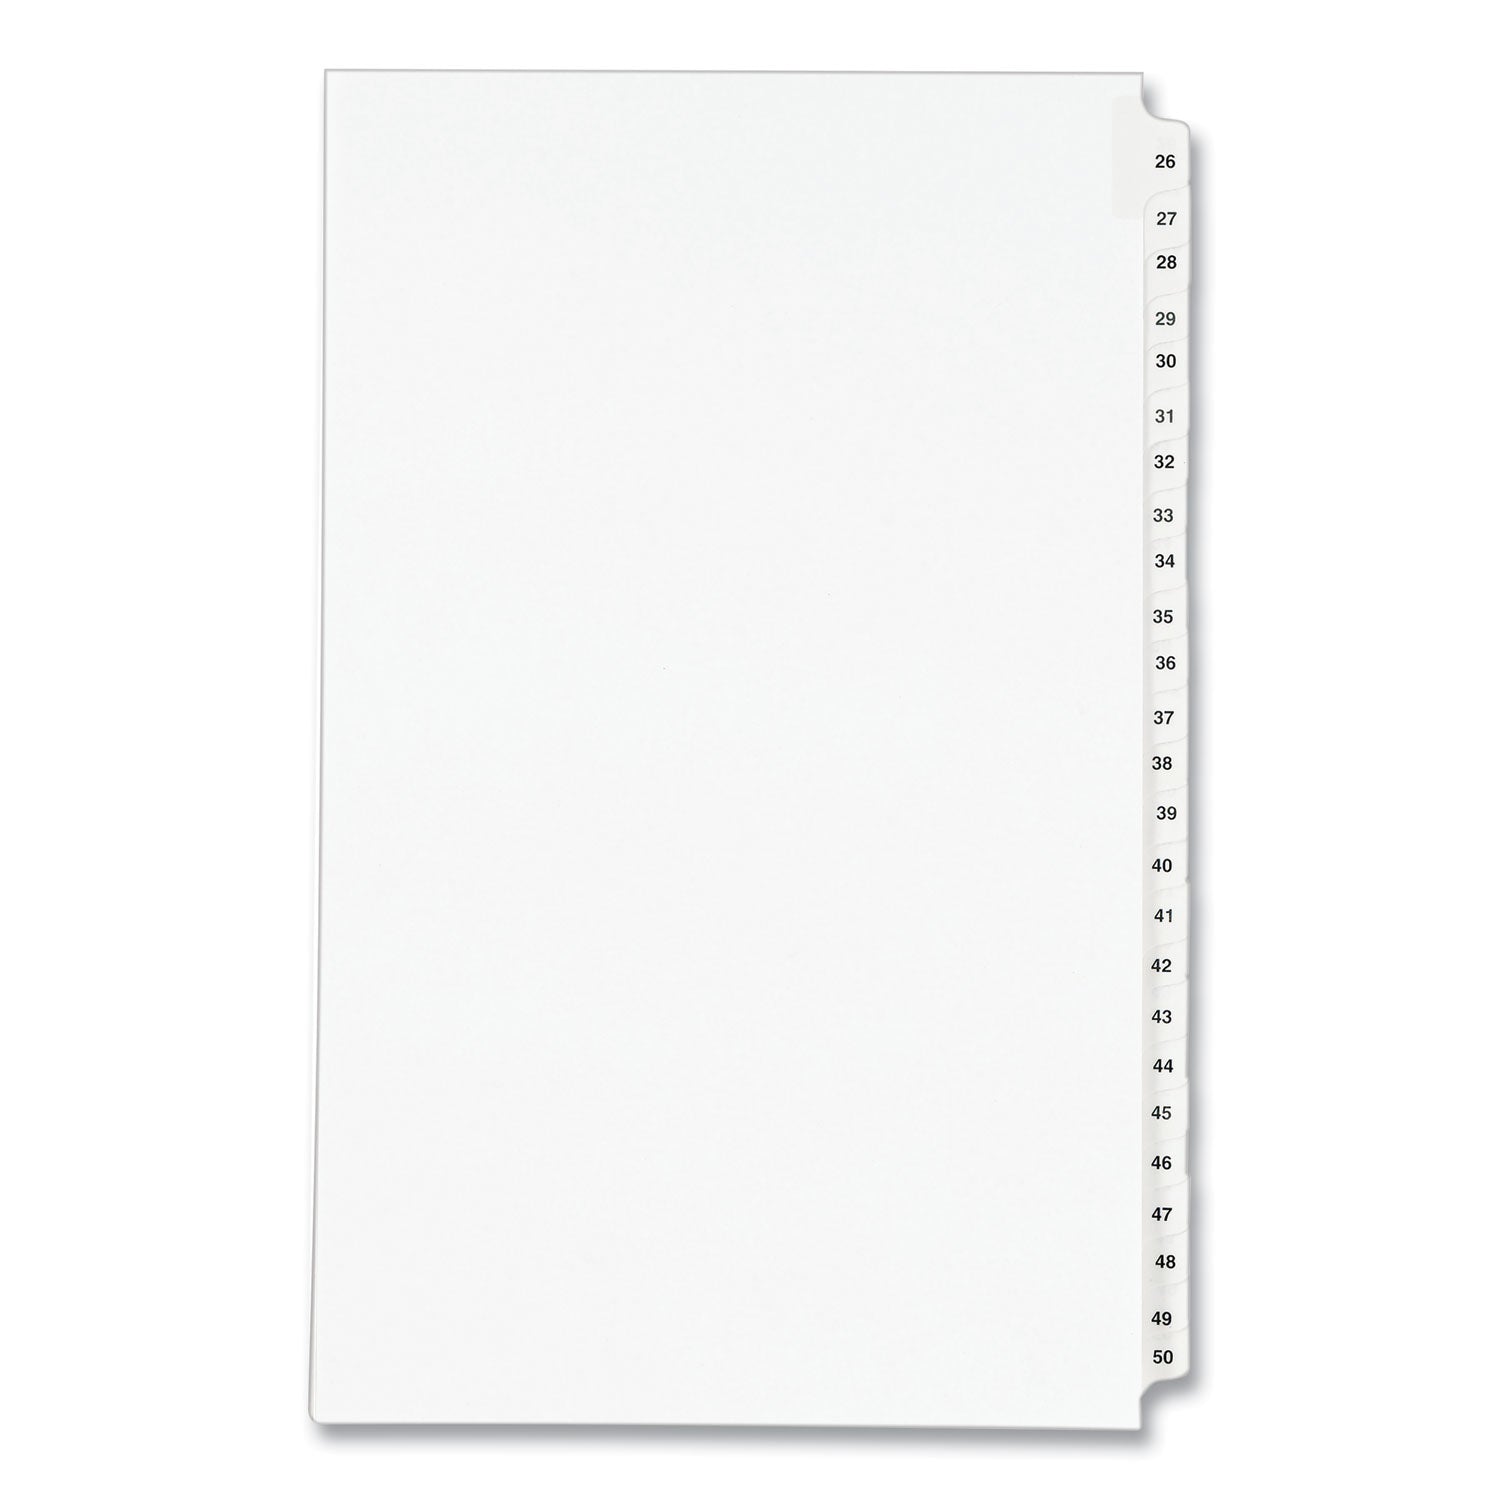 Preprinted Legal Exhibit Side Tab Index Dividers, Avery Style, 25-Tab, 26 to 50, 14 x 8.5, White, 1 Set, (1431) - 